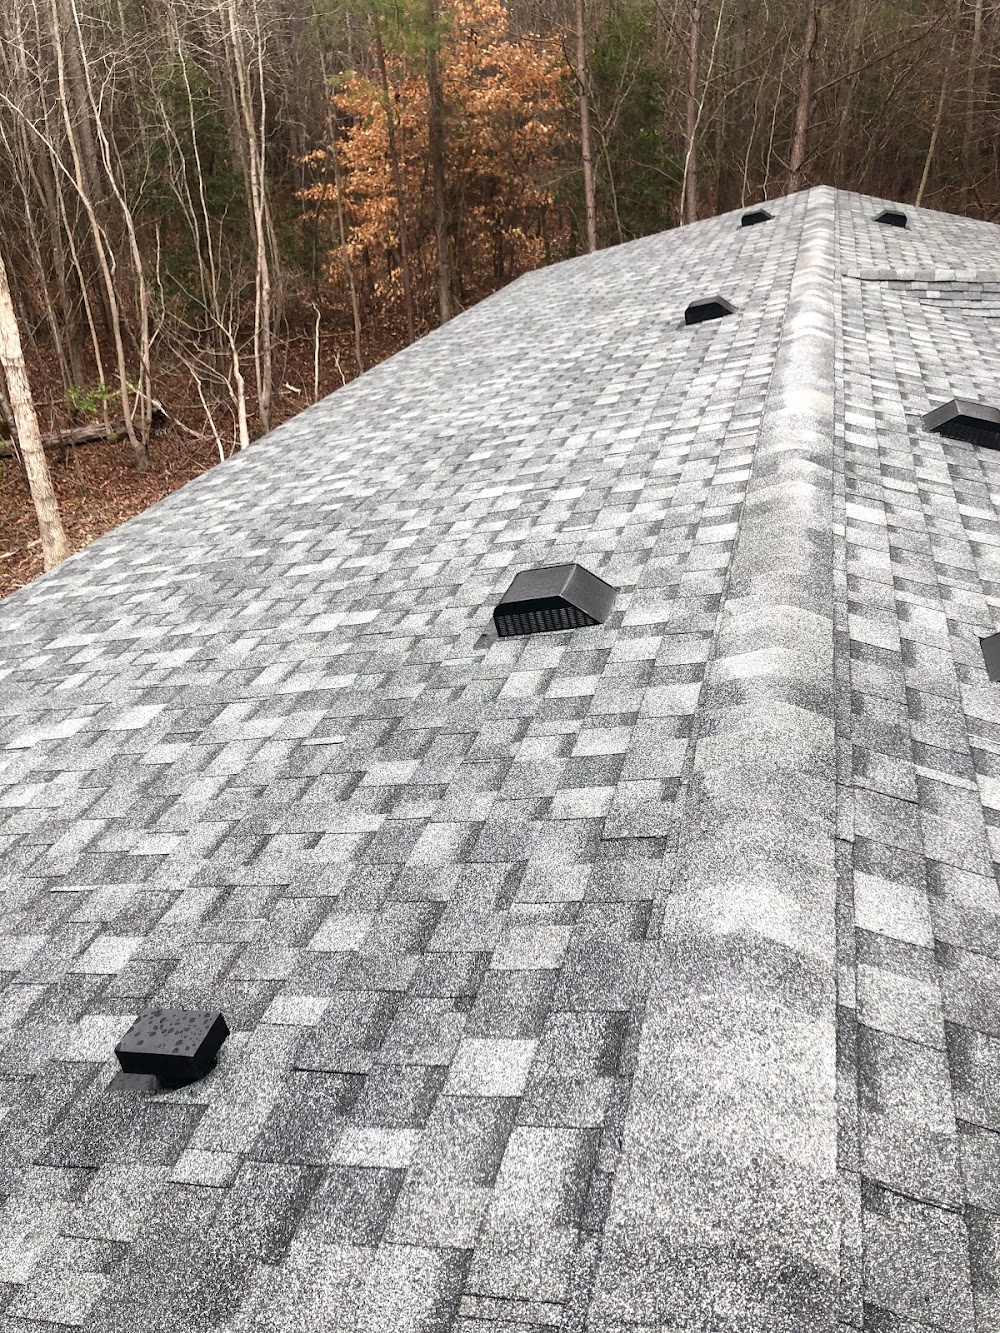 Best Choice Construction Roofing Contractors